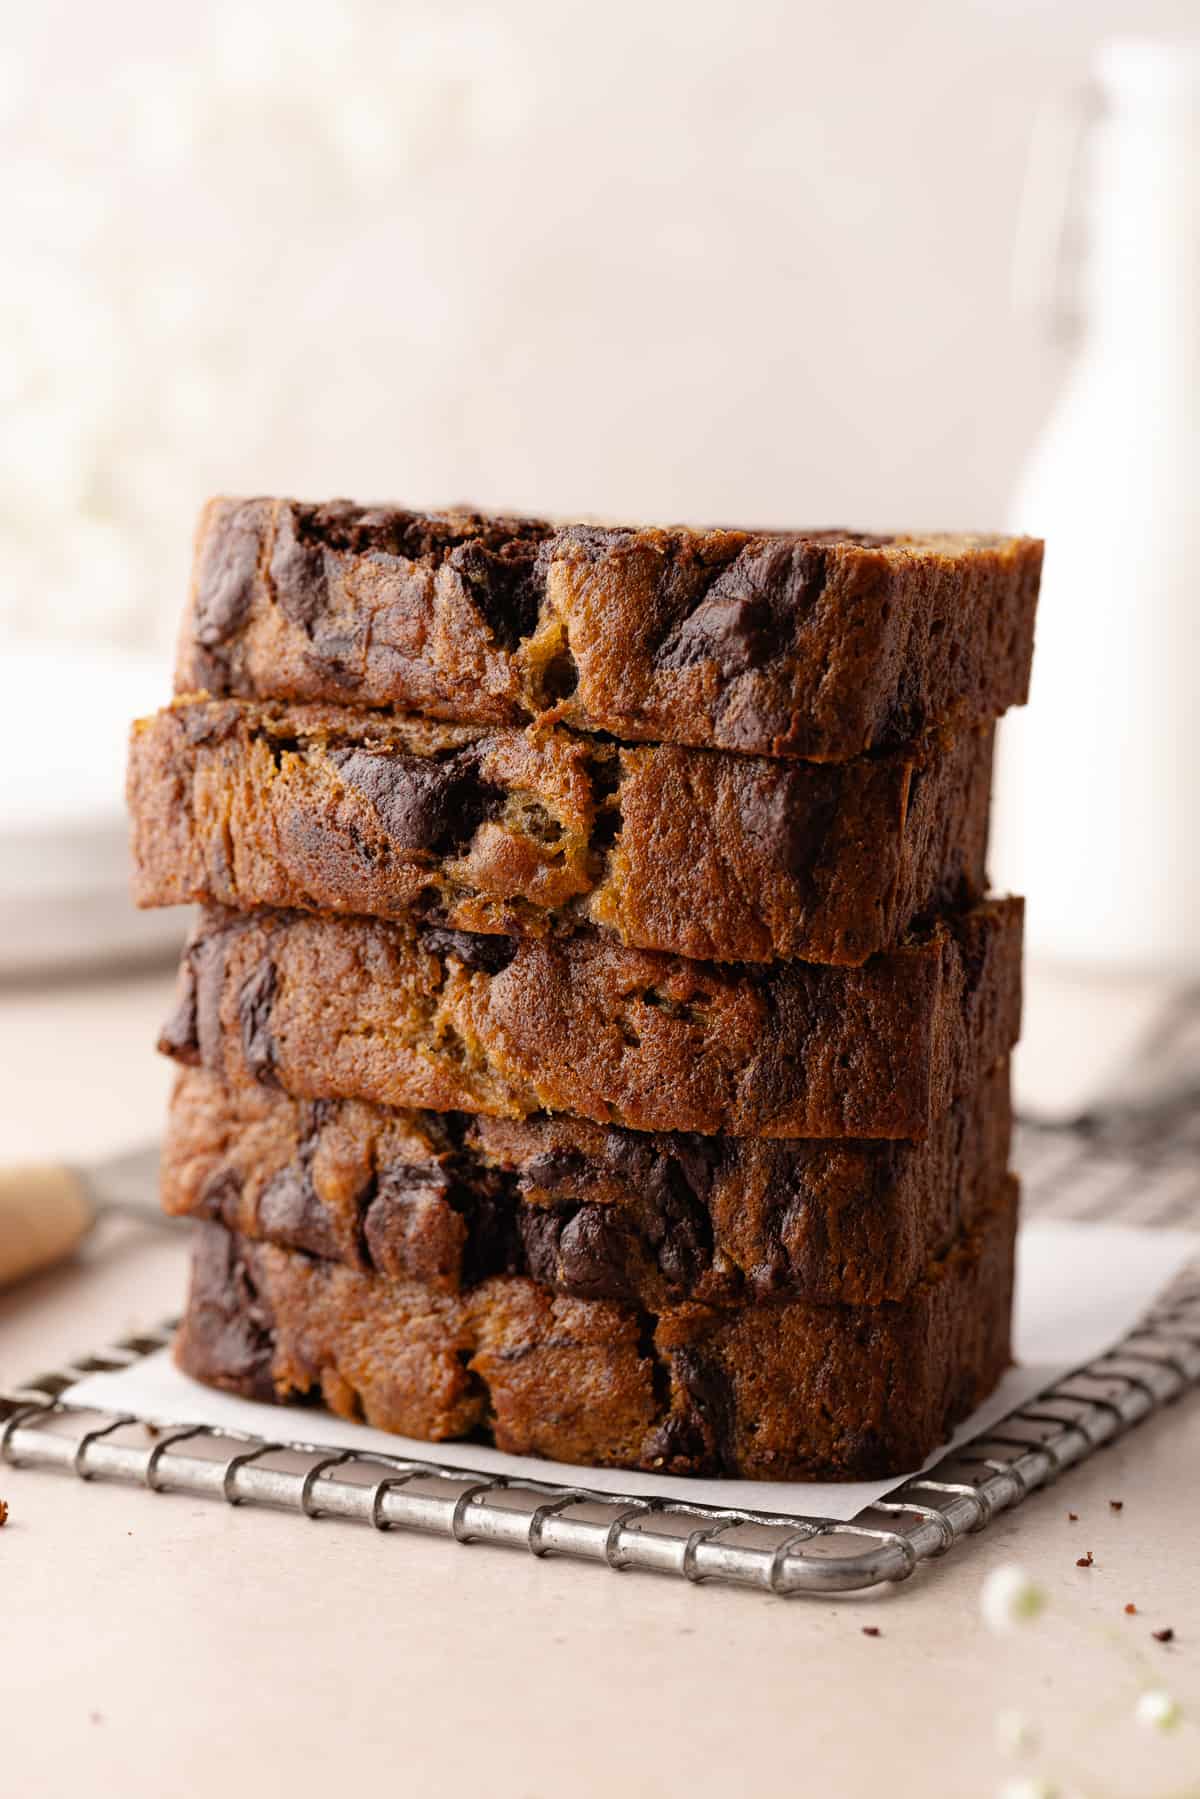 Chocolate marbled banana bread sliced and stacked on wire rack.